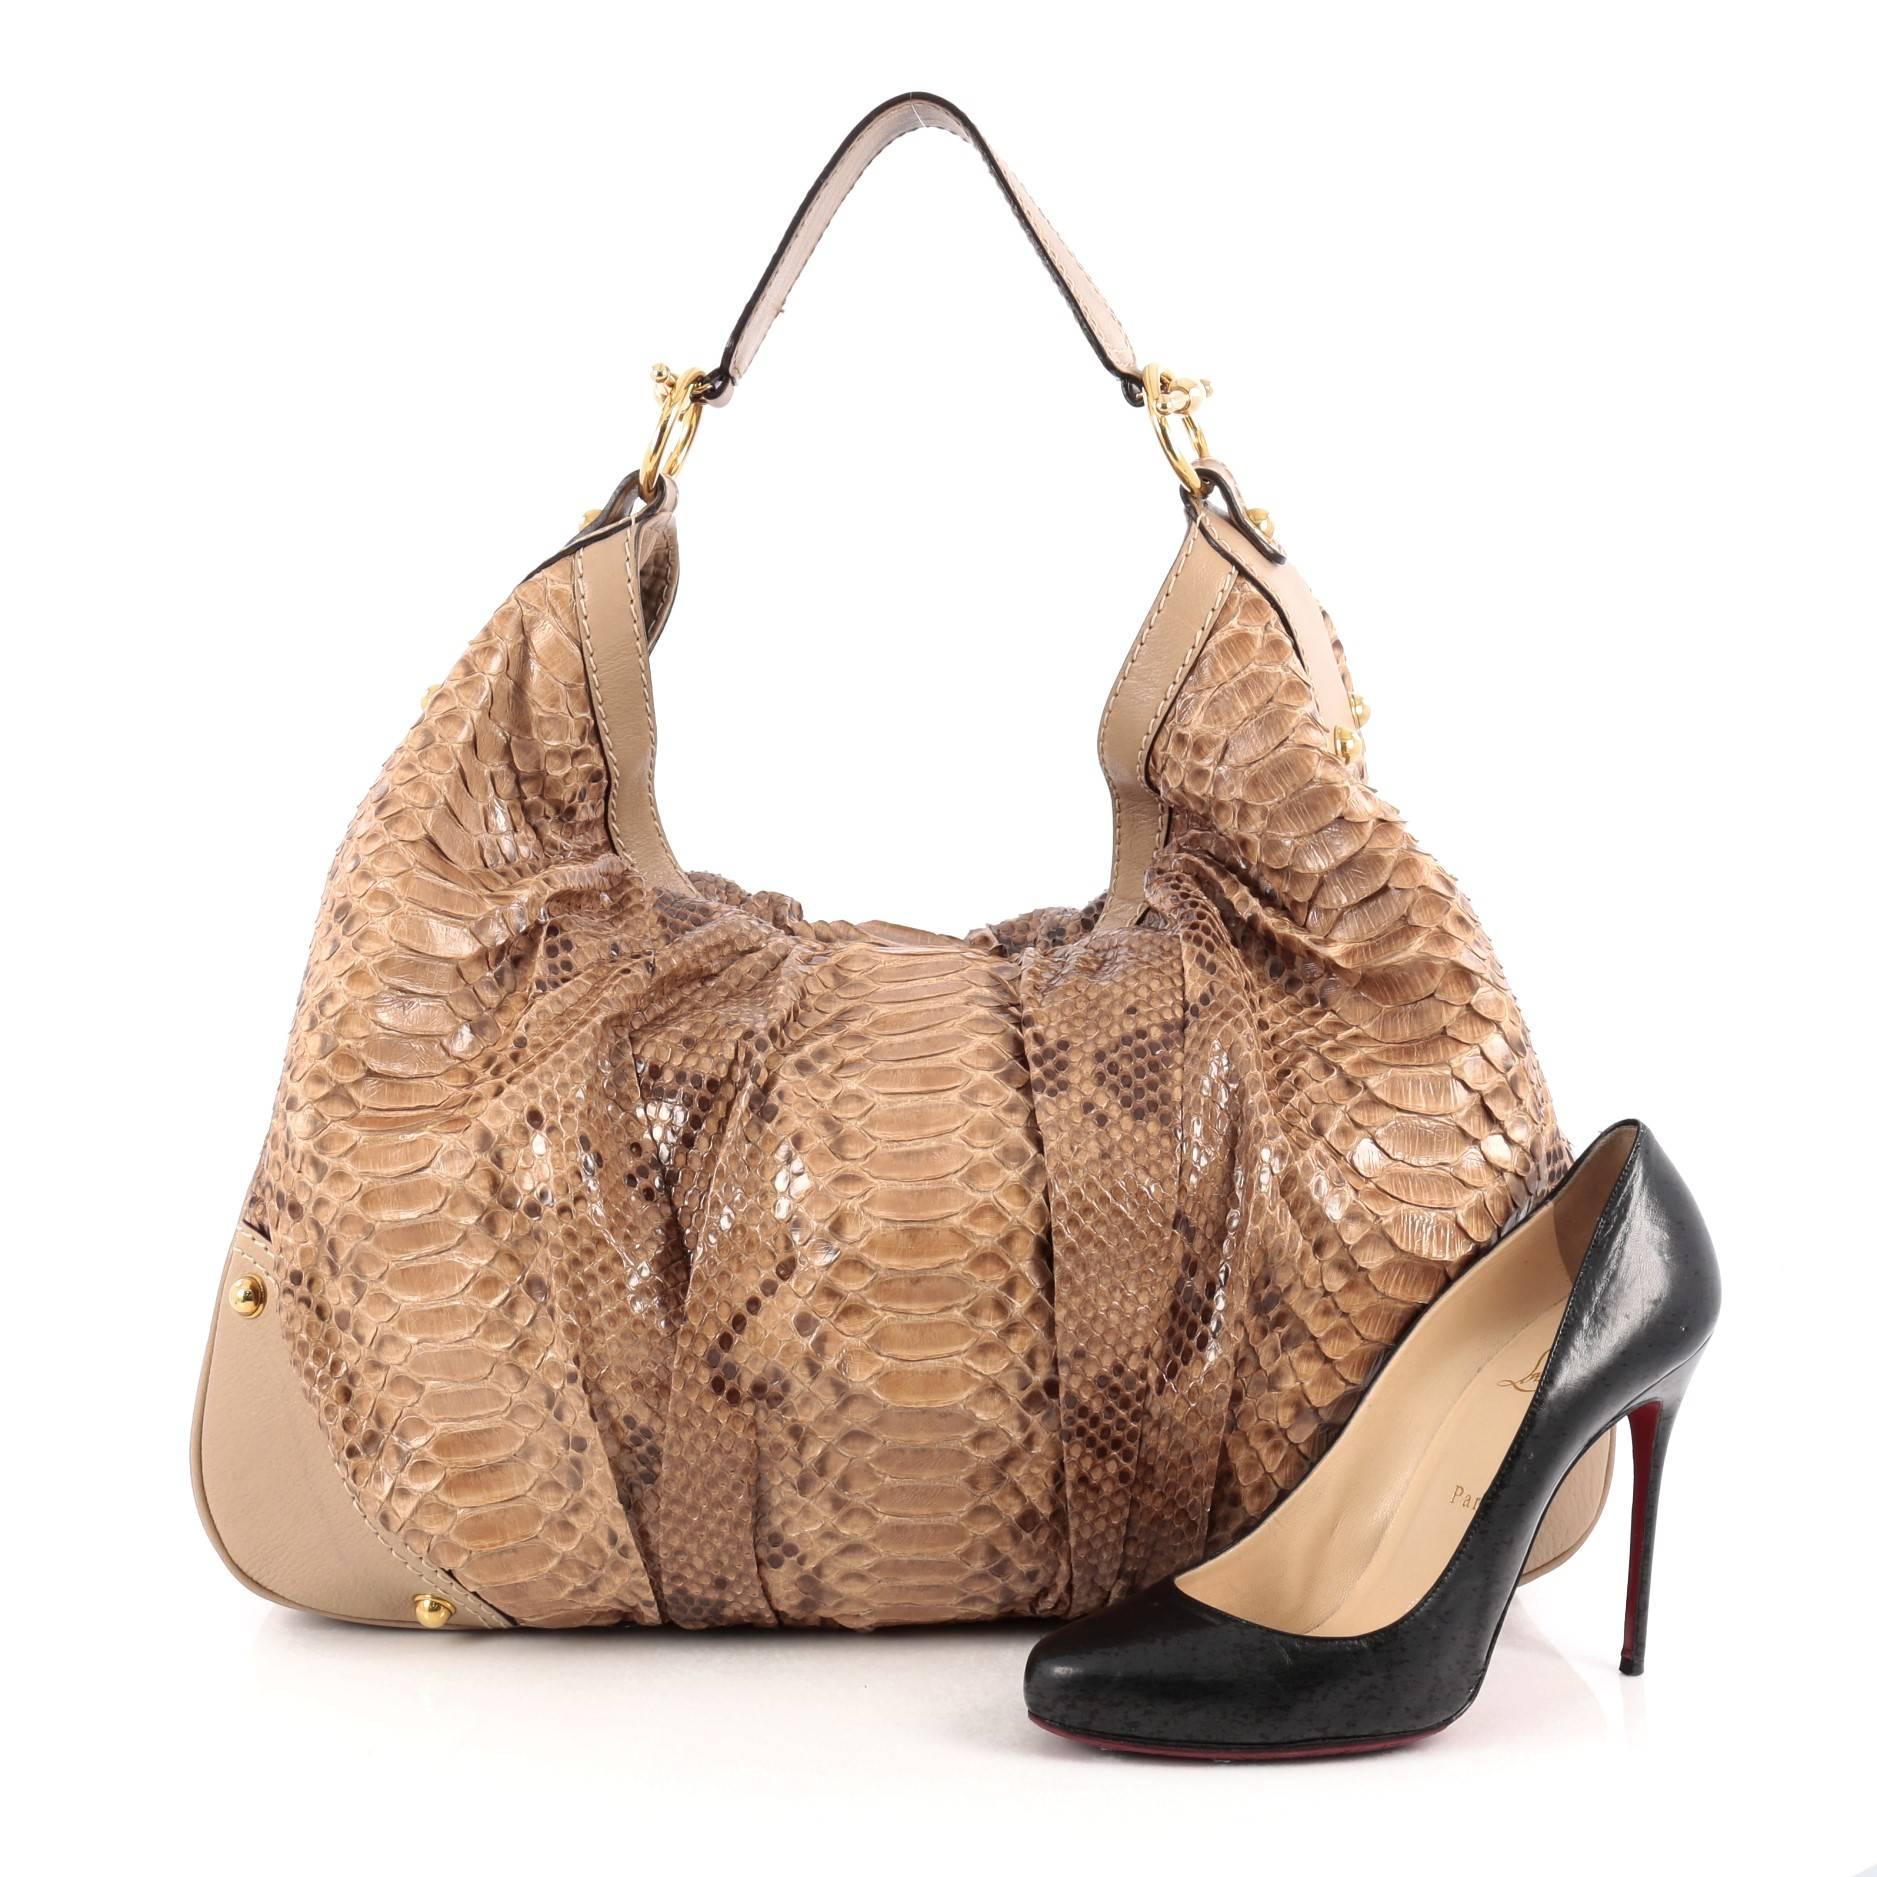 This authentic Gucci Jockey Hobo Python Large is unique and sophisticated in design perfect for everyday casual use. Crafted in brown genuine python skin, this hobo features a wide leather handle, brown leather trims, Gucci side ring details, gold